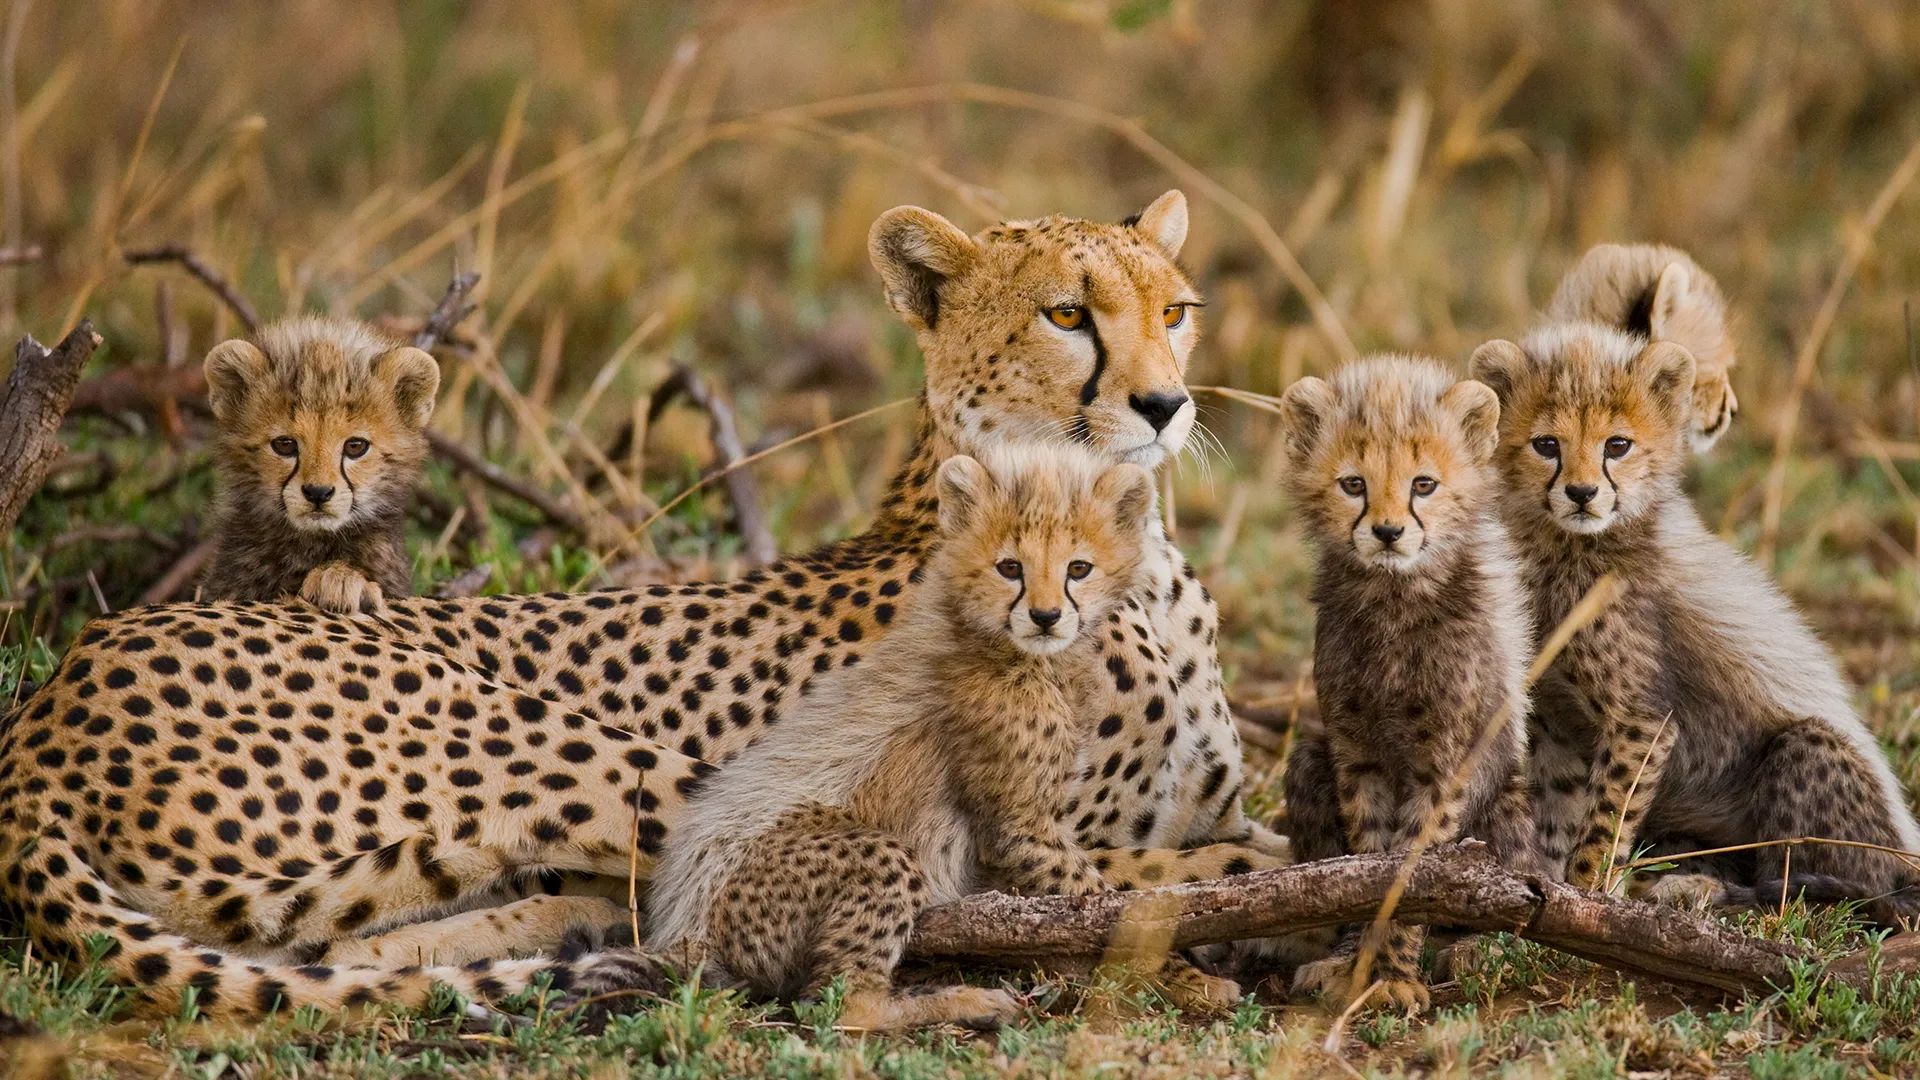 A cheetah mother and her cubs in their natural habitat